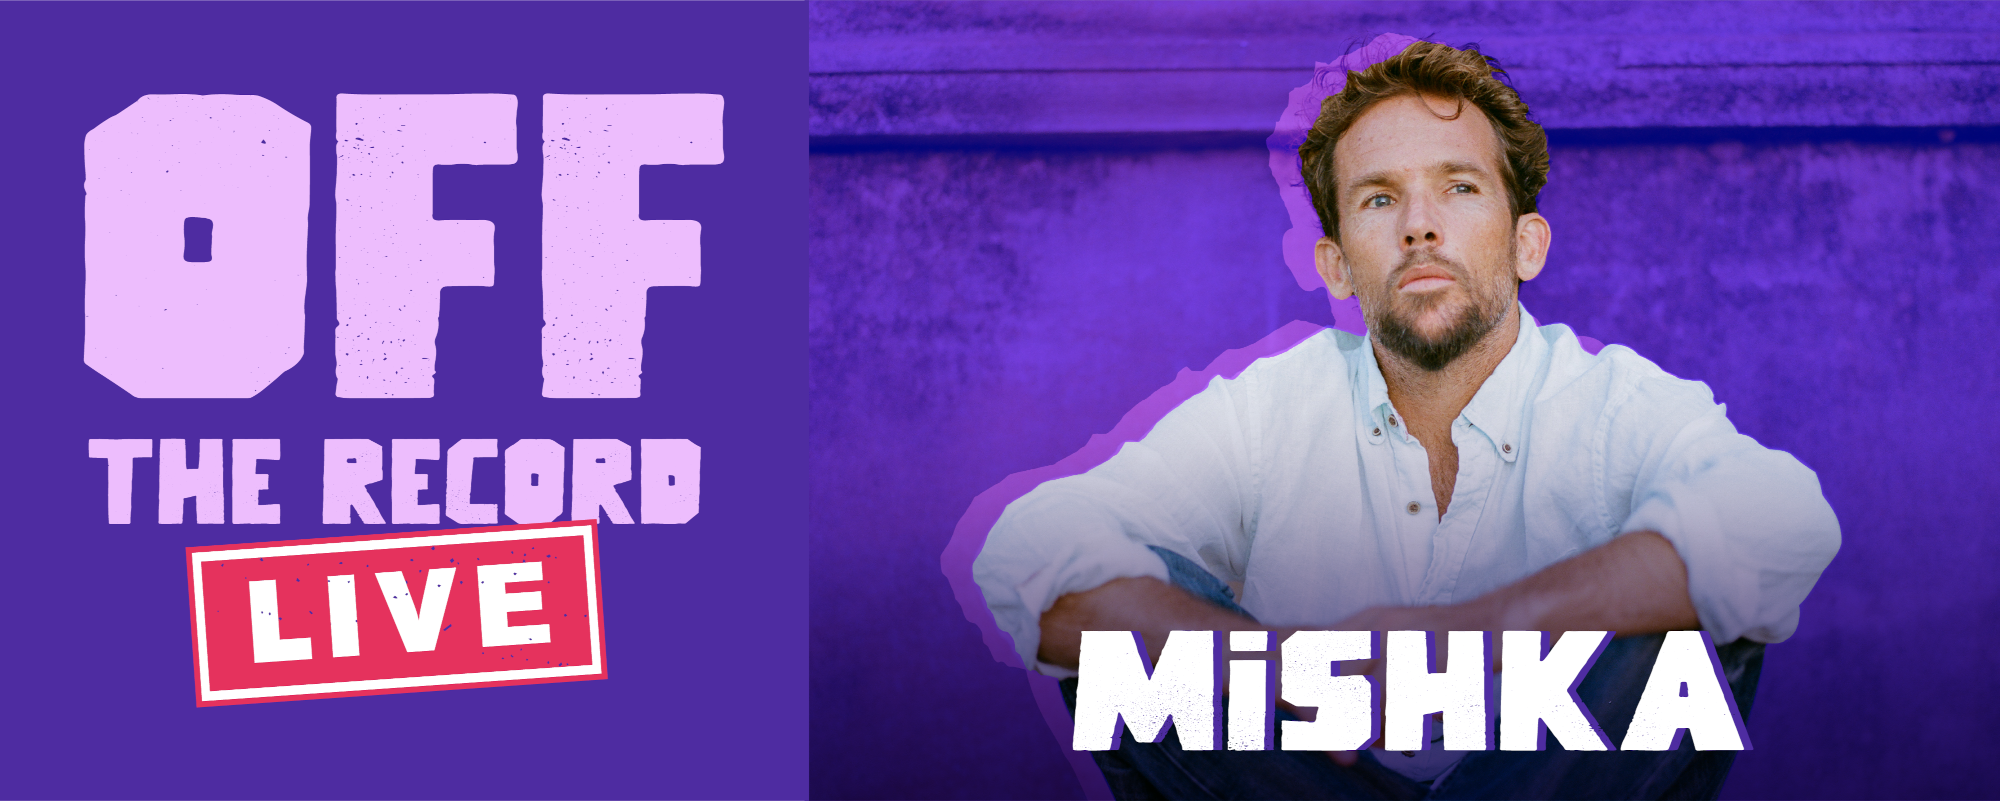 Off The Record Live: Mishka Talks Growing Up on a Boat, Collaborating with Jimmy Buffett and Willie Nelson and More